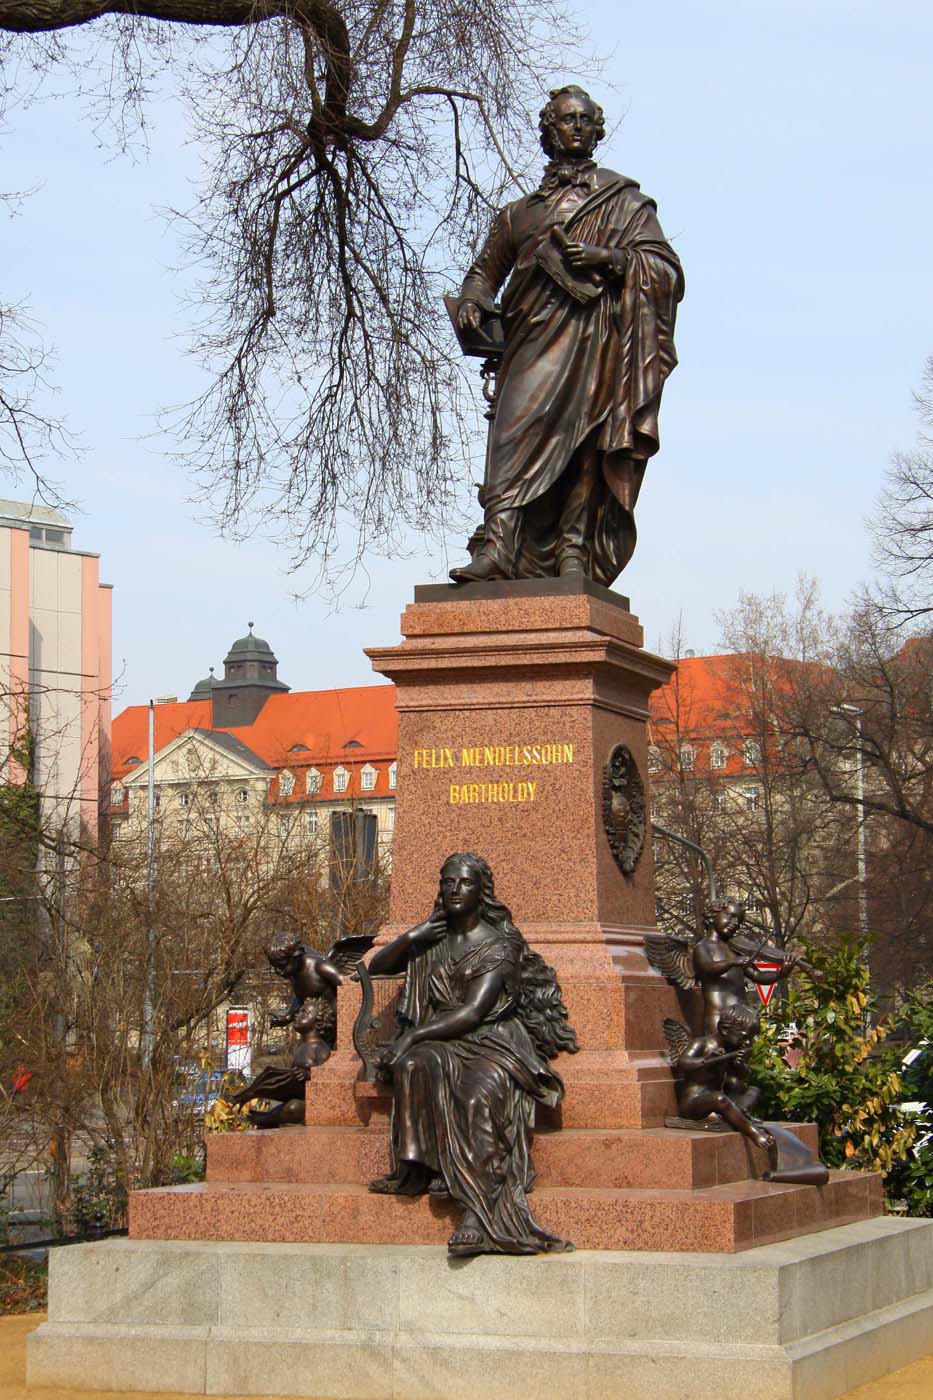 Statue of Felix Mendelssohn Bartholdy next to the Thomaskirche in Leipzig. Mendelssohn's performance of the Matthaeus Passion in 1829, the first performance since Bach's lifetime, was a watershed moment in the rediscovery of Bach's work in the 19th century.